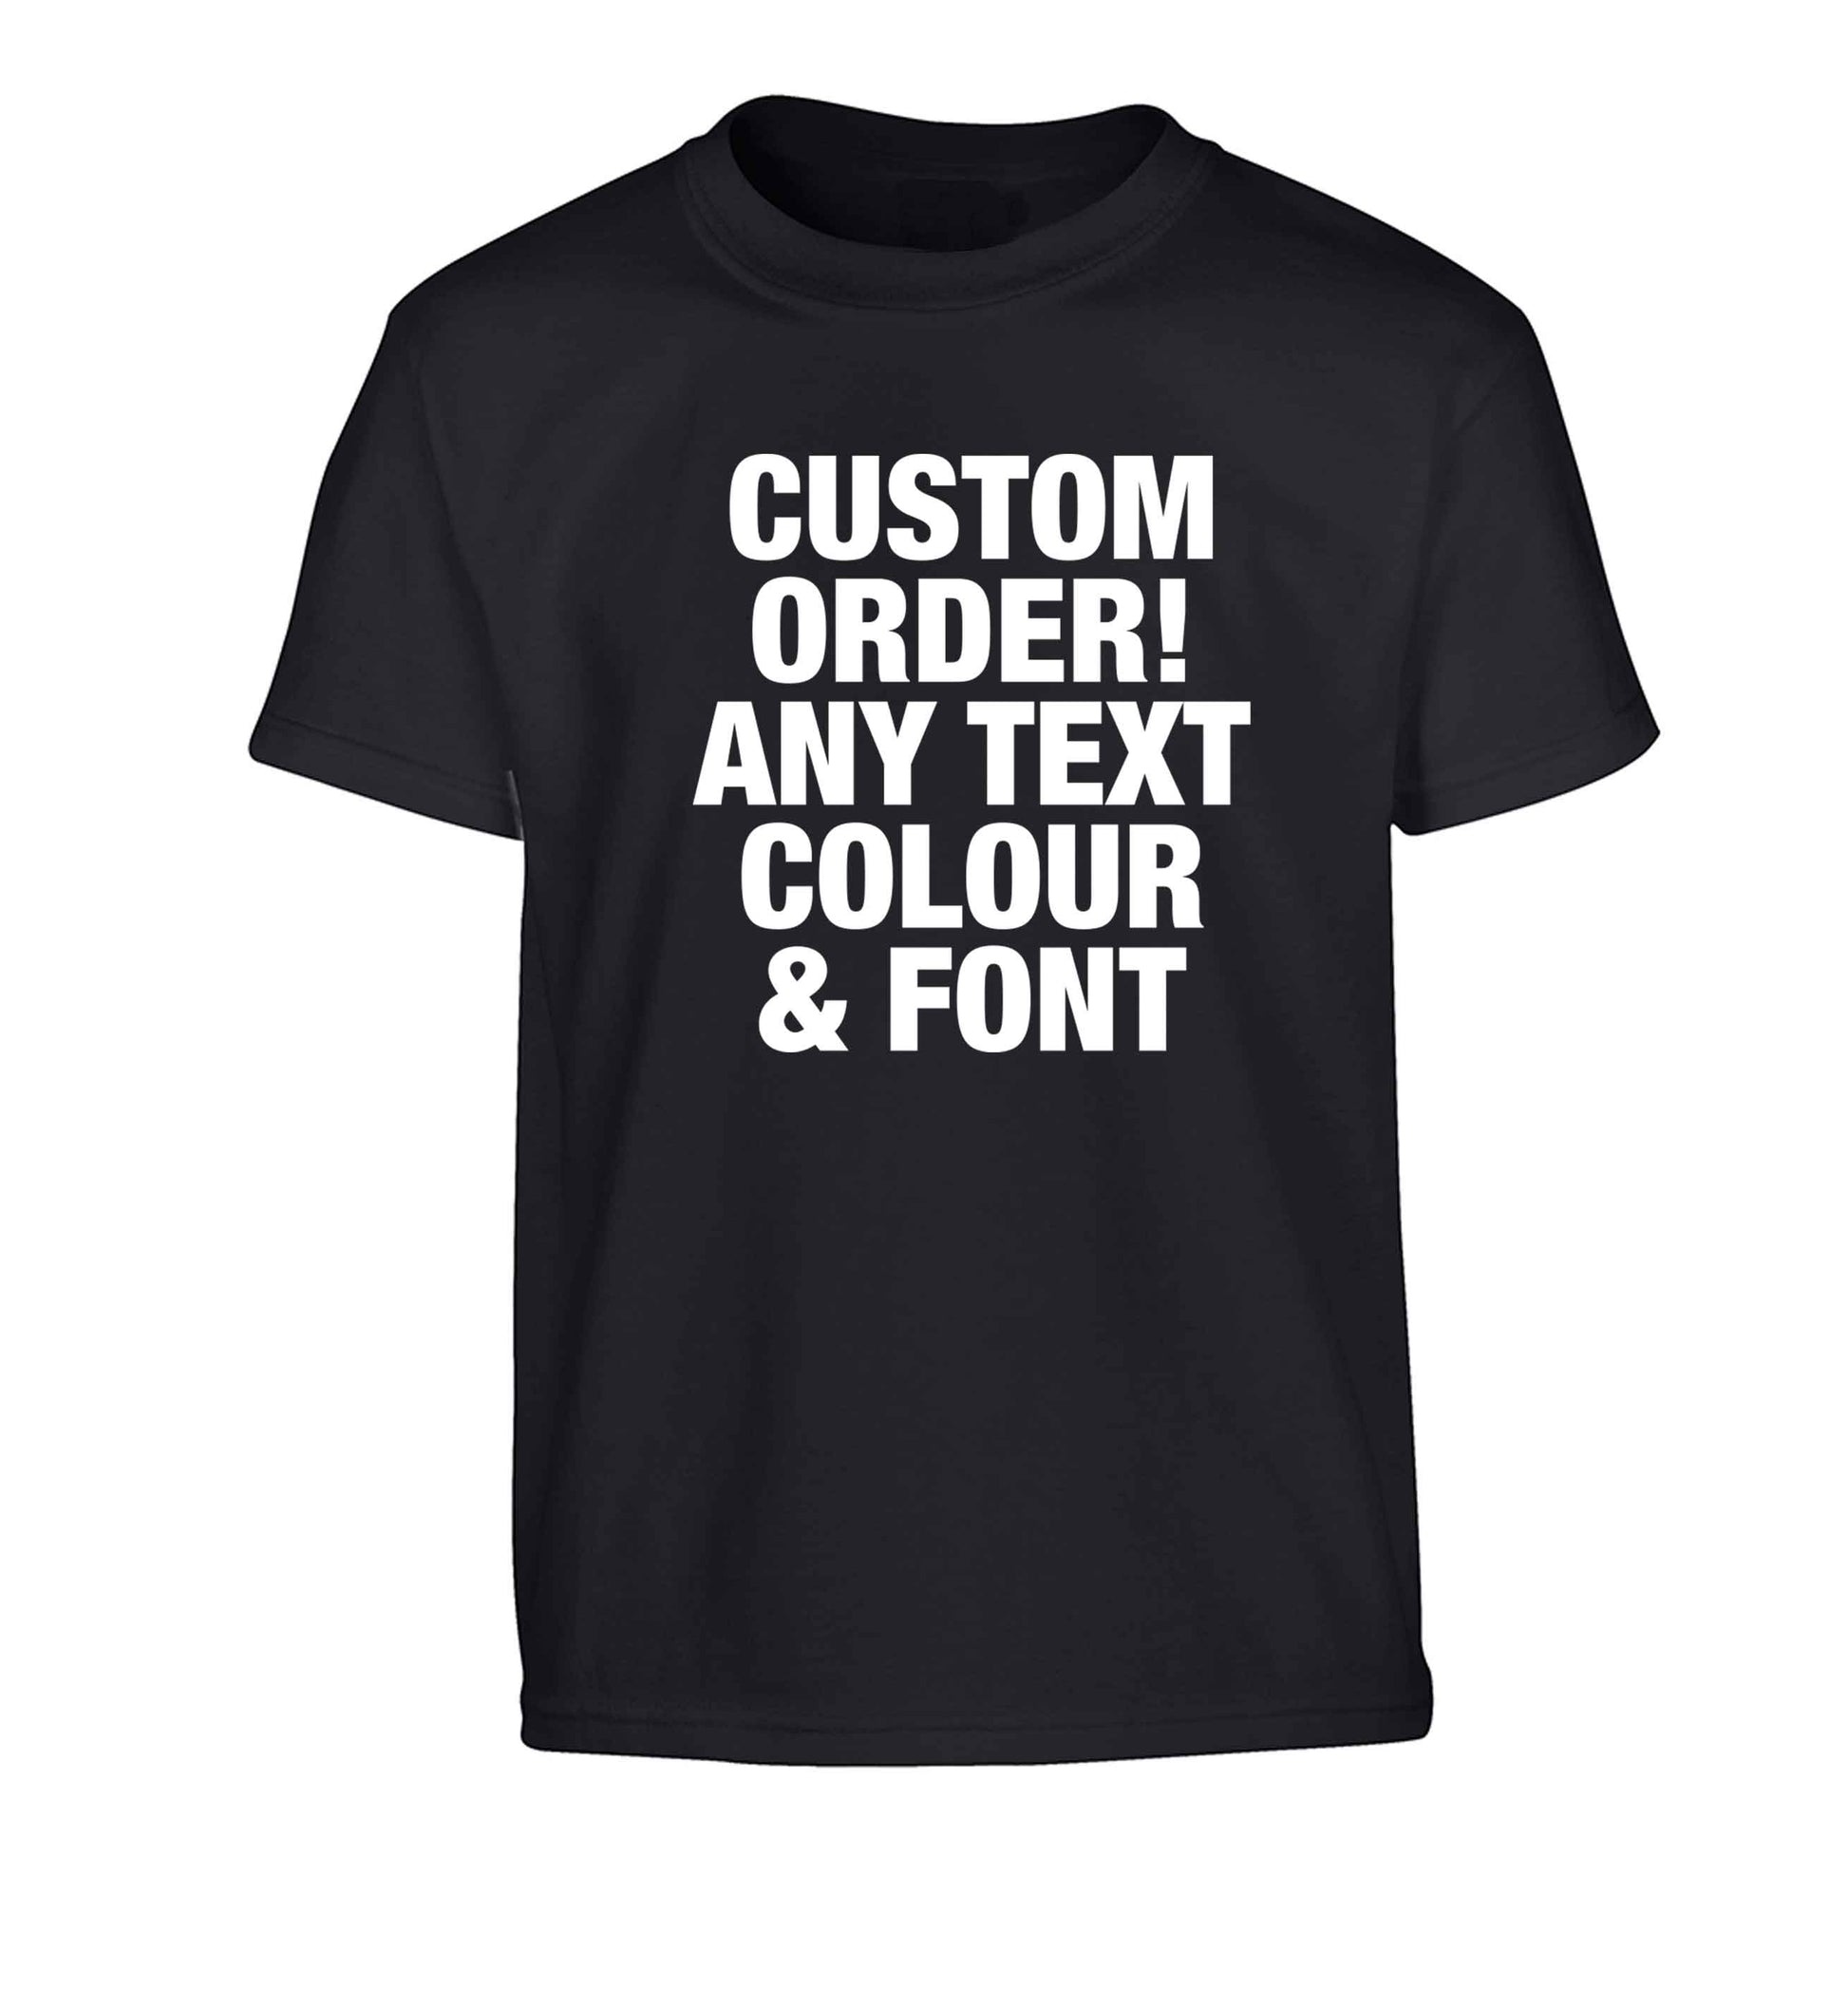 Custom order any text colour and font Children's black Tshirt 12-13 Years